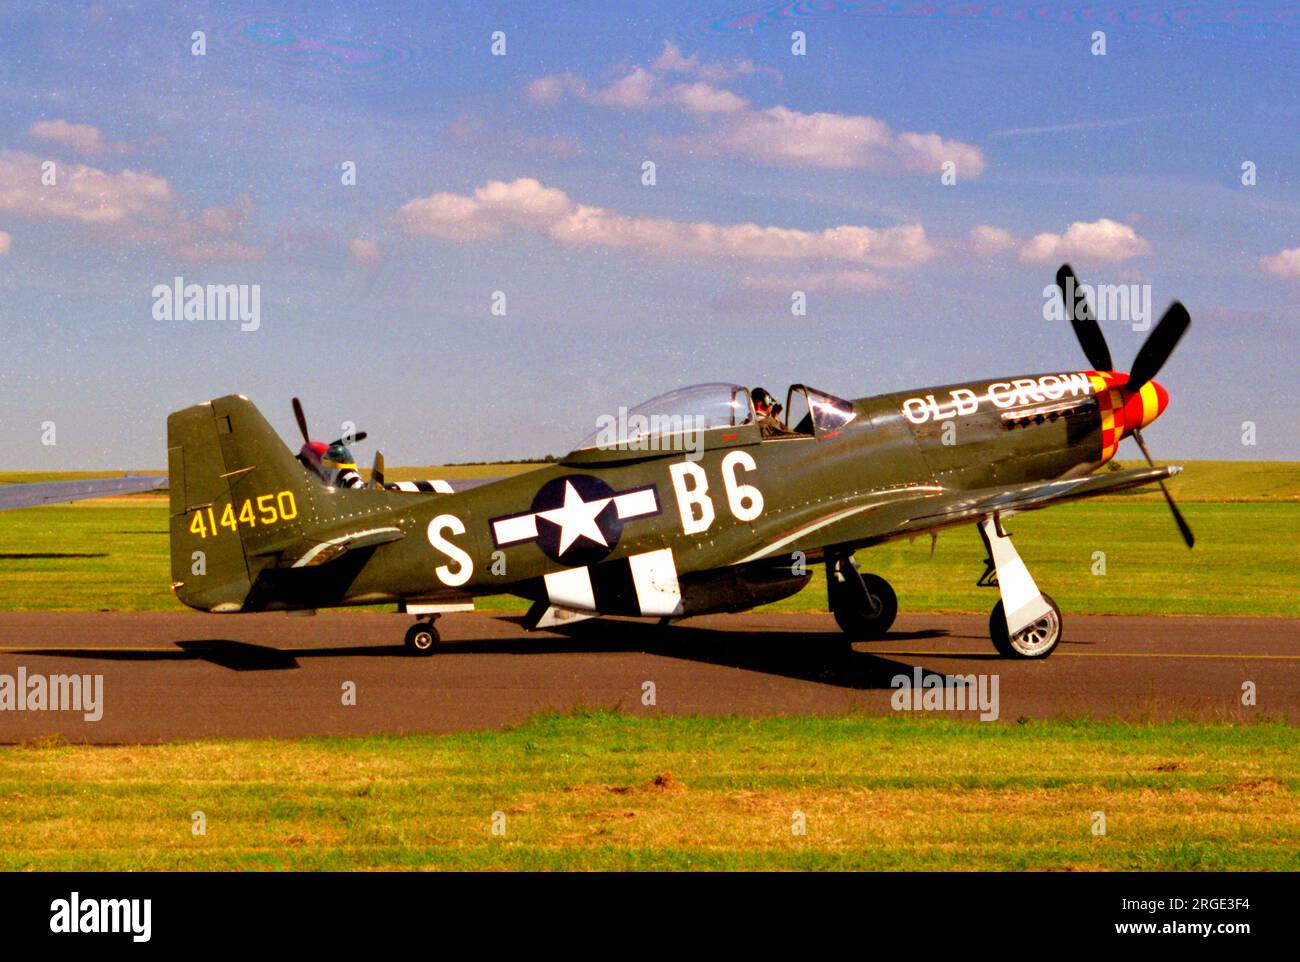 North American P-51D-10-NA Mustang 44-14450 / 'Old Crow' (msn 122-28083) Stock Photo